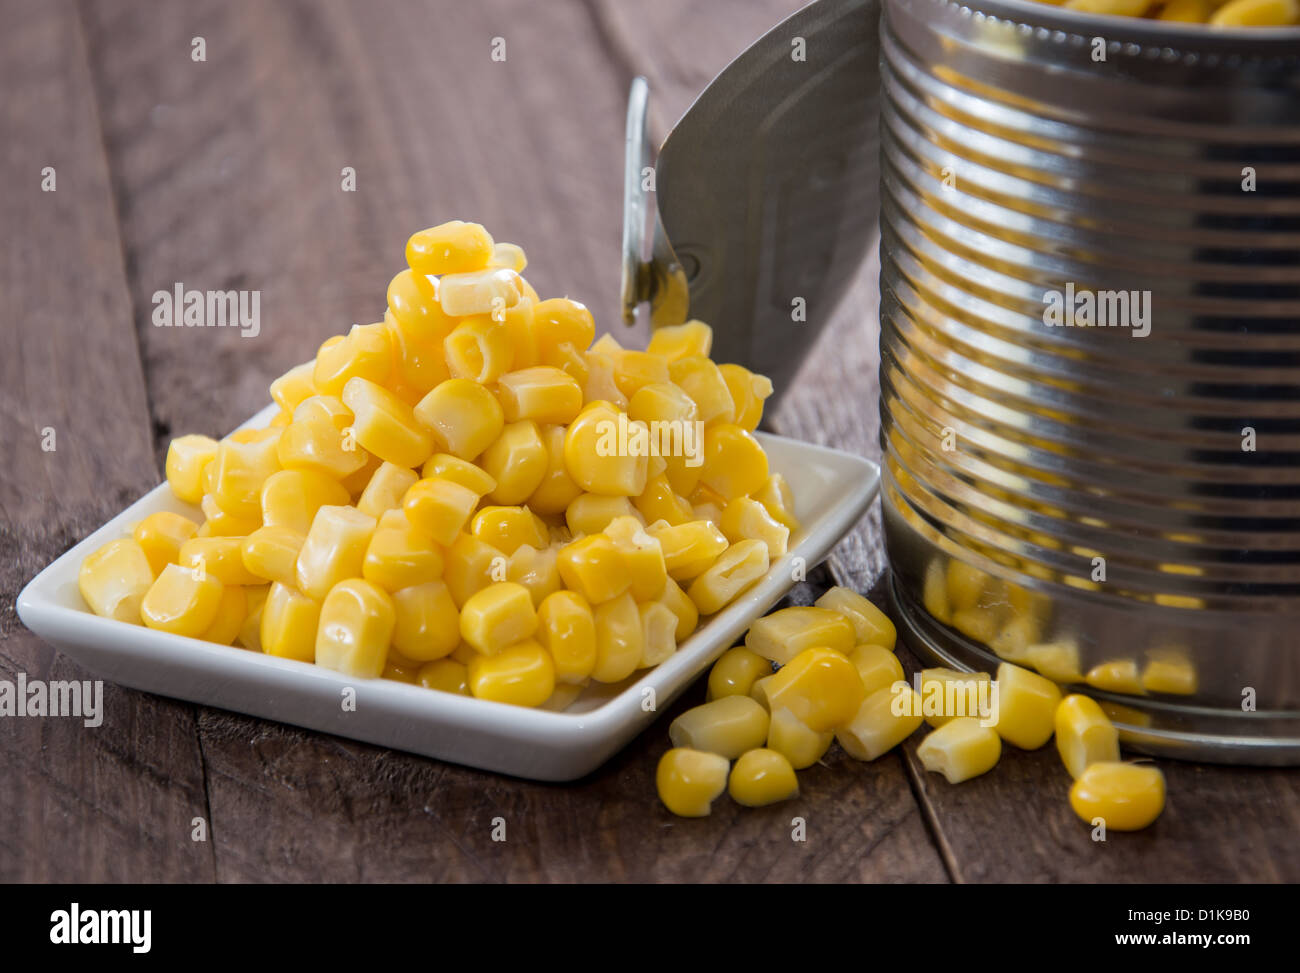 Canned Corn on wooden background Stock Photo